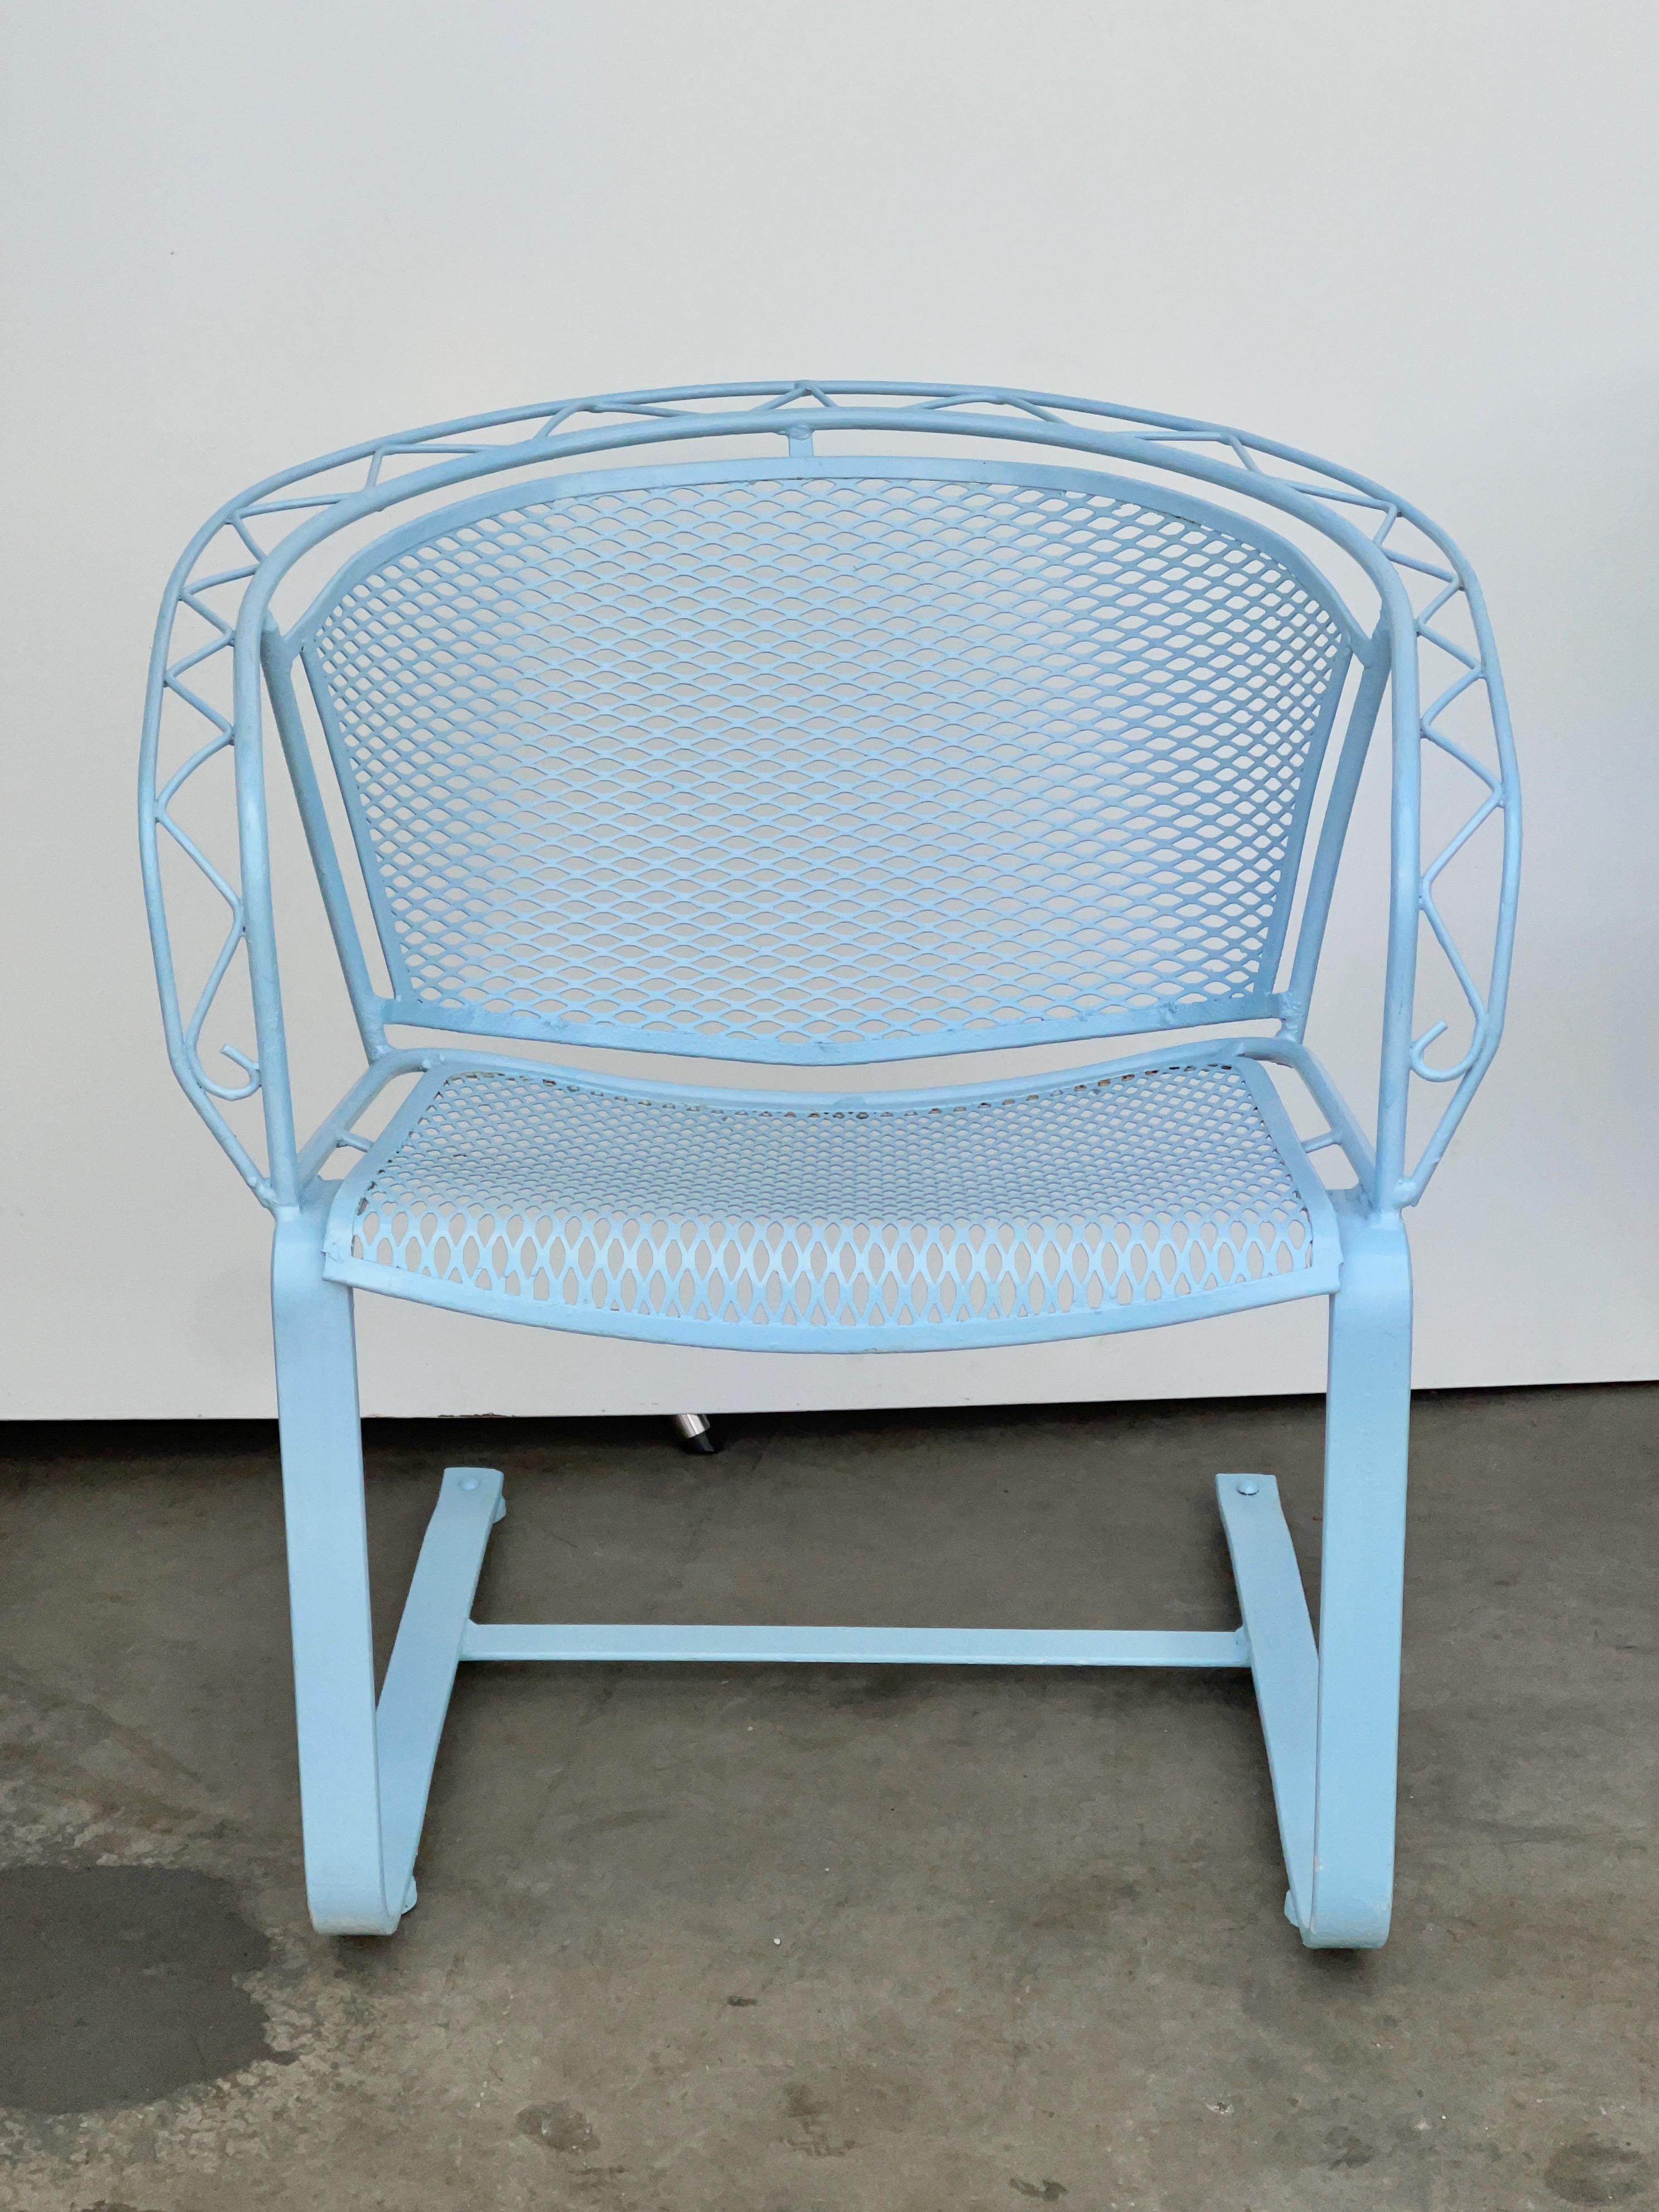 BG GALLERIES Rites of Spring Sale

Vintage 1950s Woodard baby blue painted wrought iron seating group consisting of a pair of bouncer armchairs and a two-seat settee.

Dimensions:

Chairs
Height 28”
Width 24”
Depth 28”
Seat Height 16”

Settee
Height